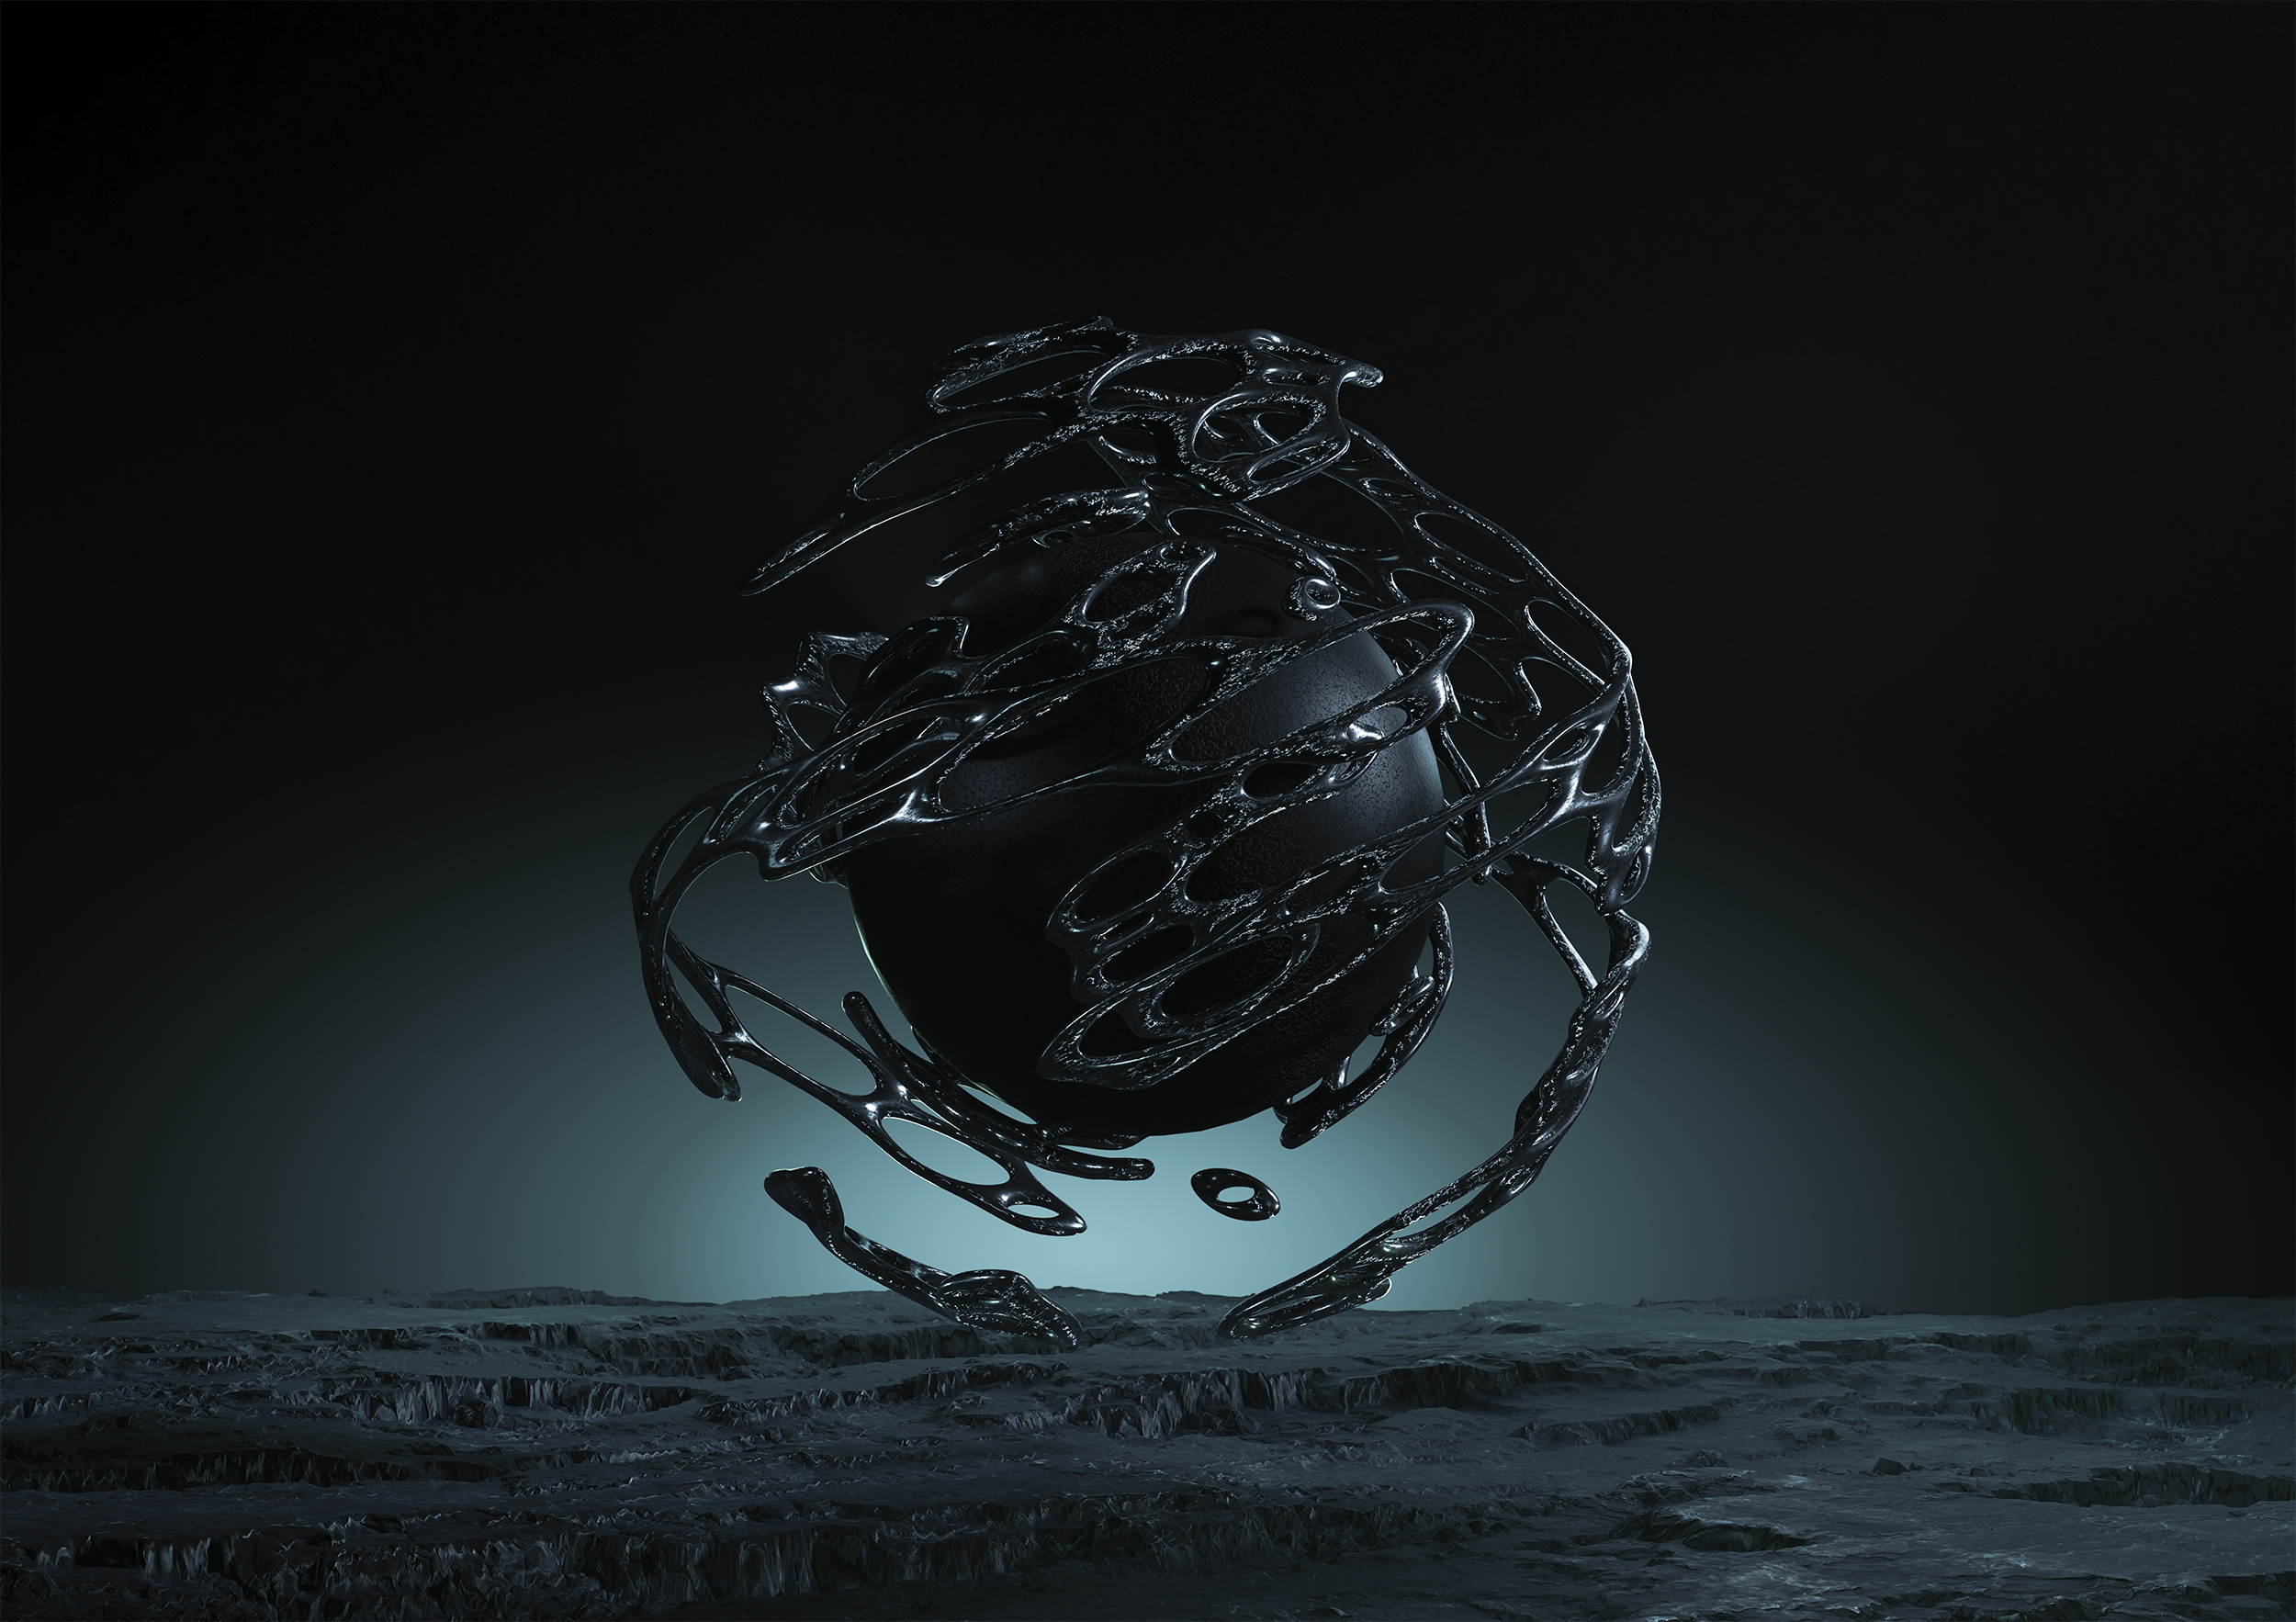 BA photography work by Chris Gardiner depicting a render of a floating, metallic, abstract orb, in a dark environment.